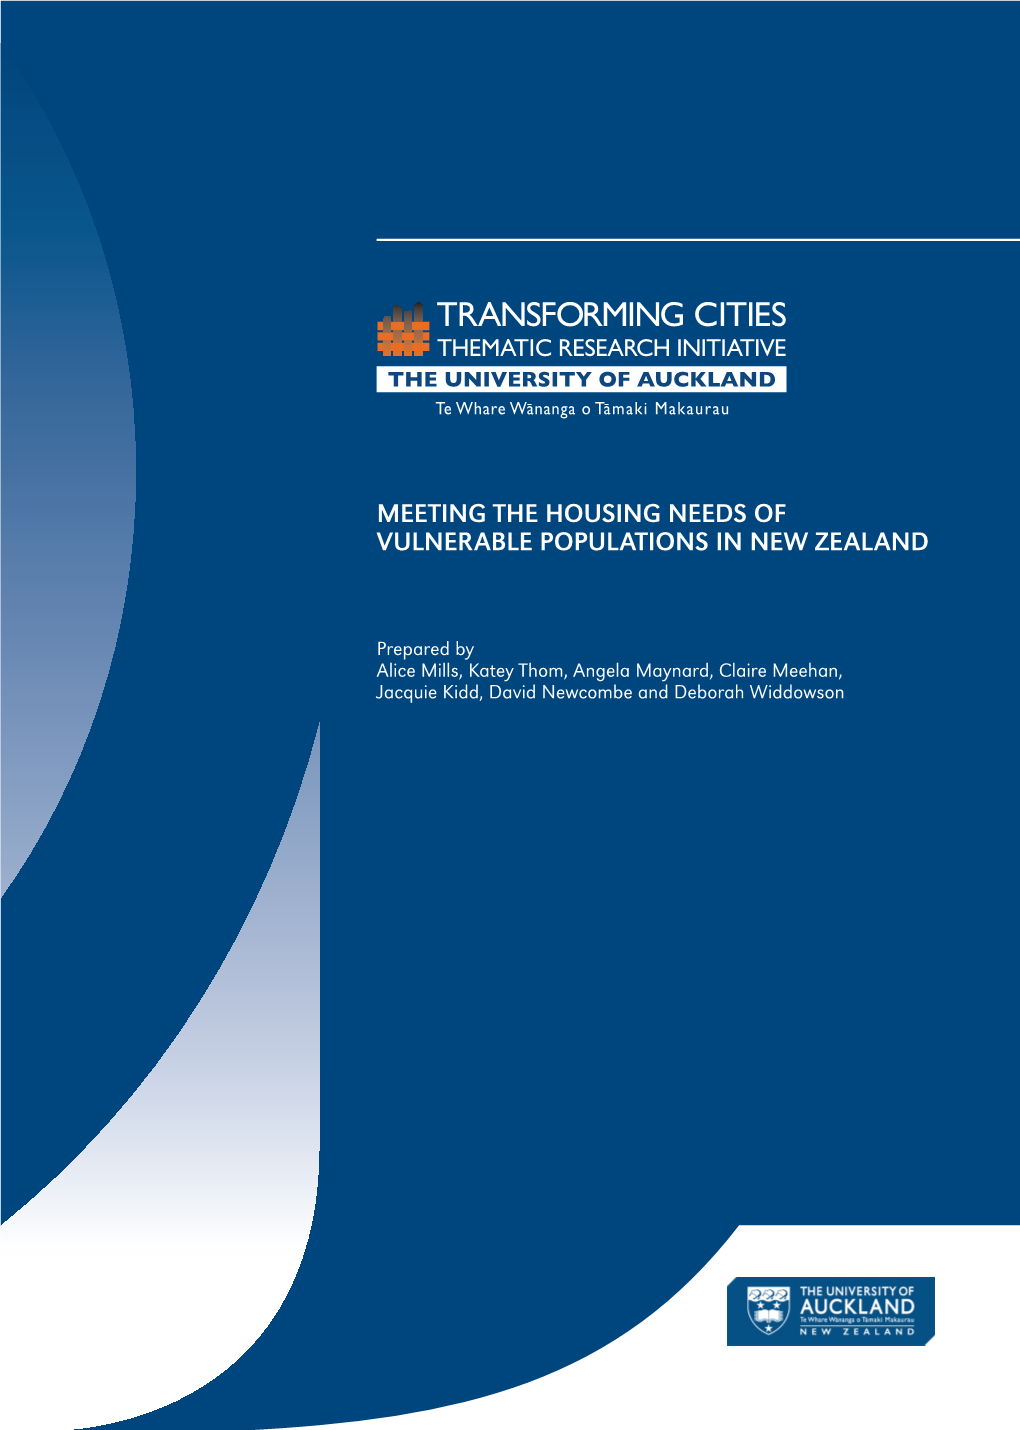 Meeting the Housing Needs of Vulnerable Populations in New Zealand